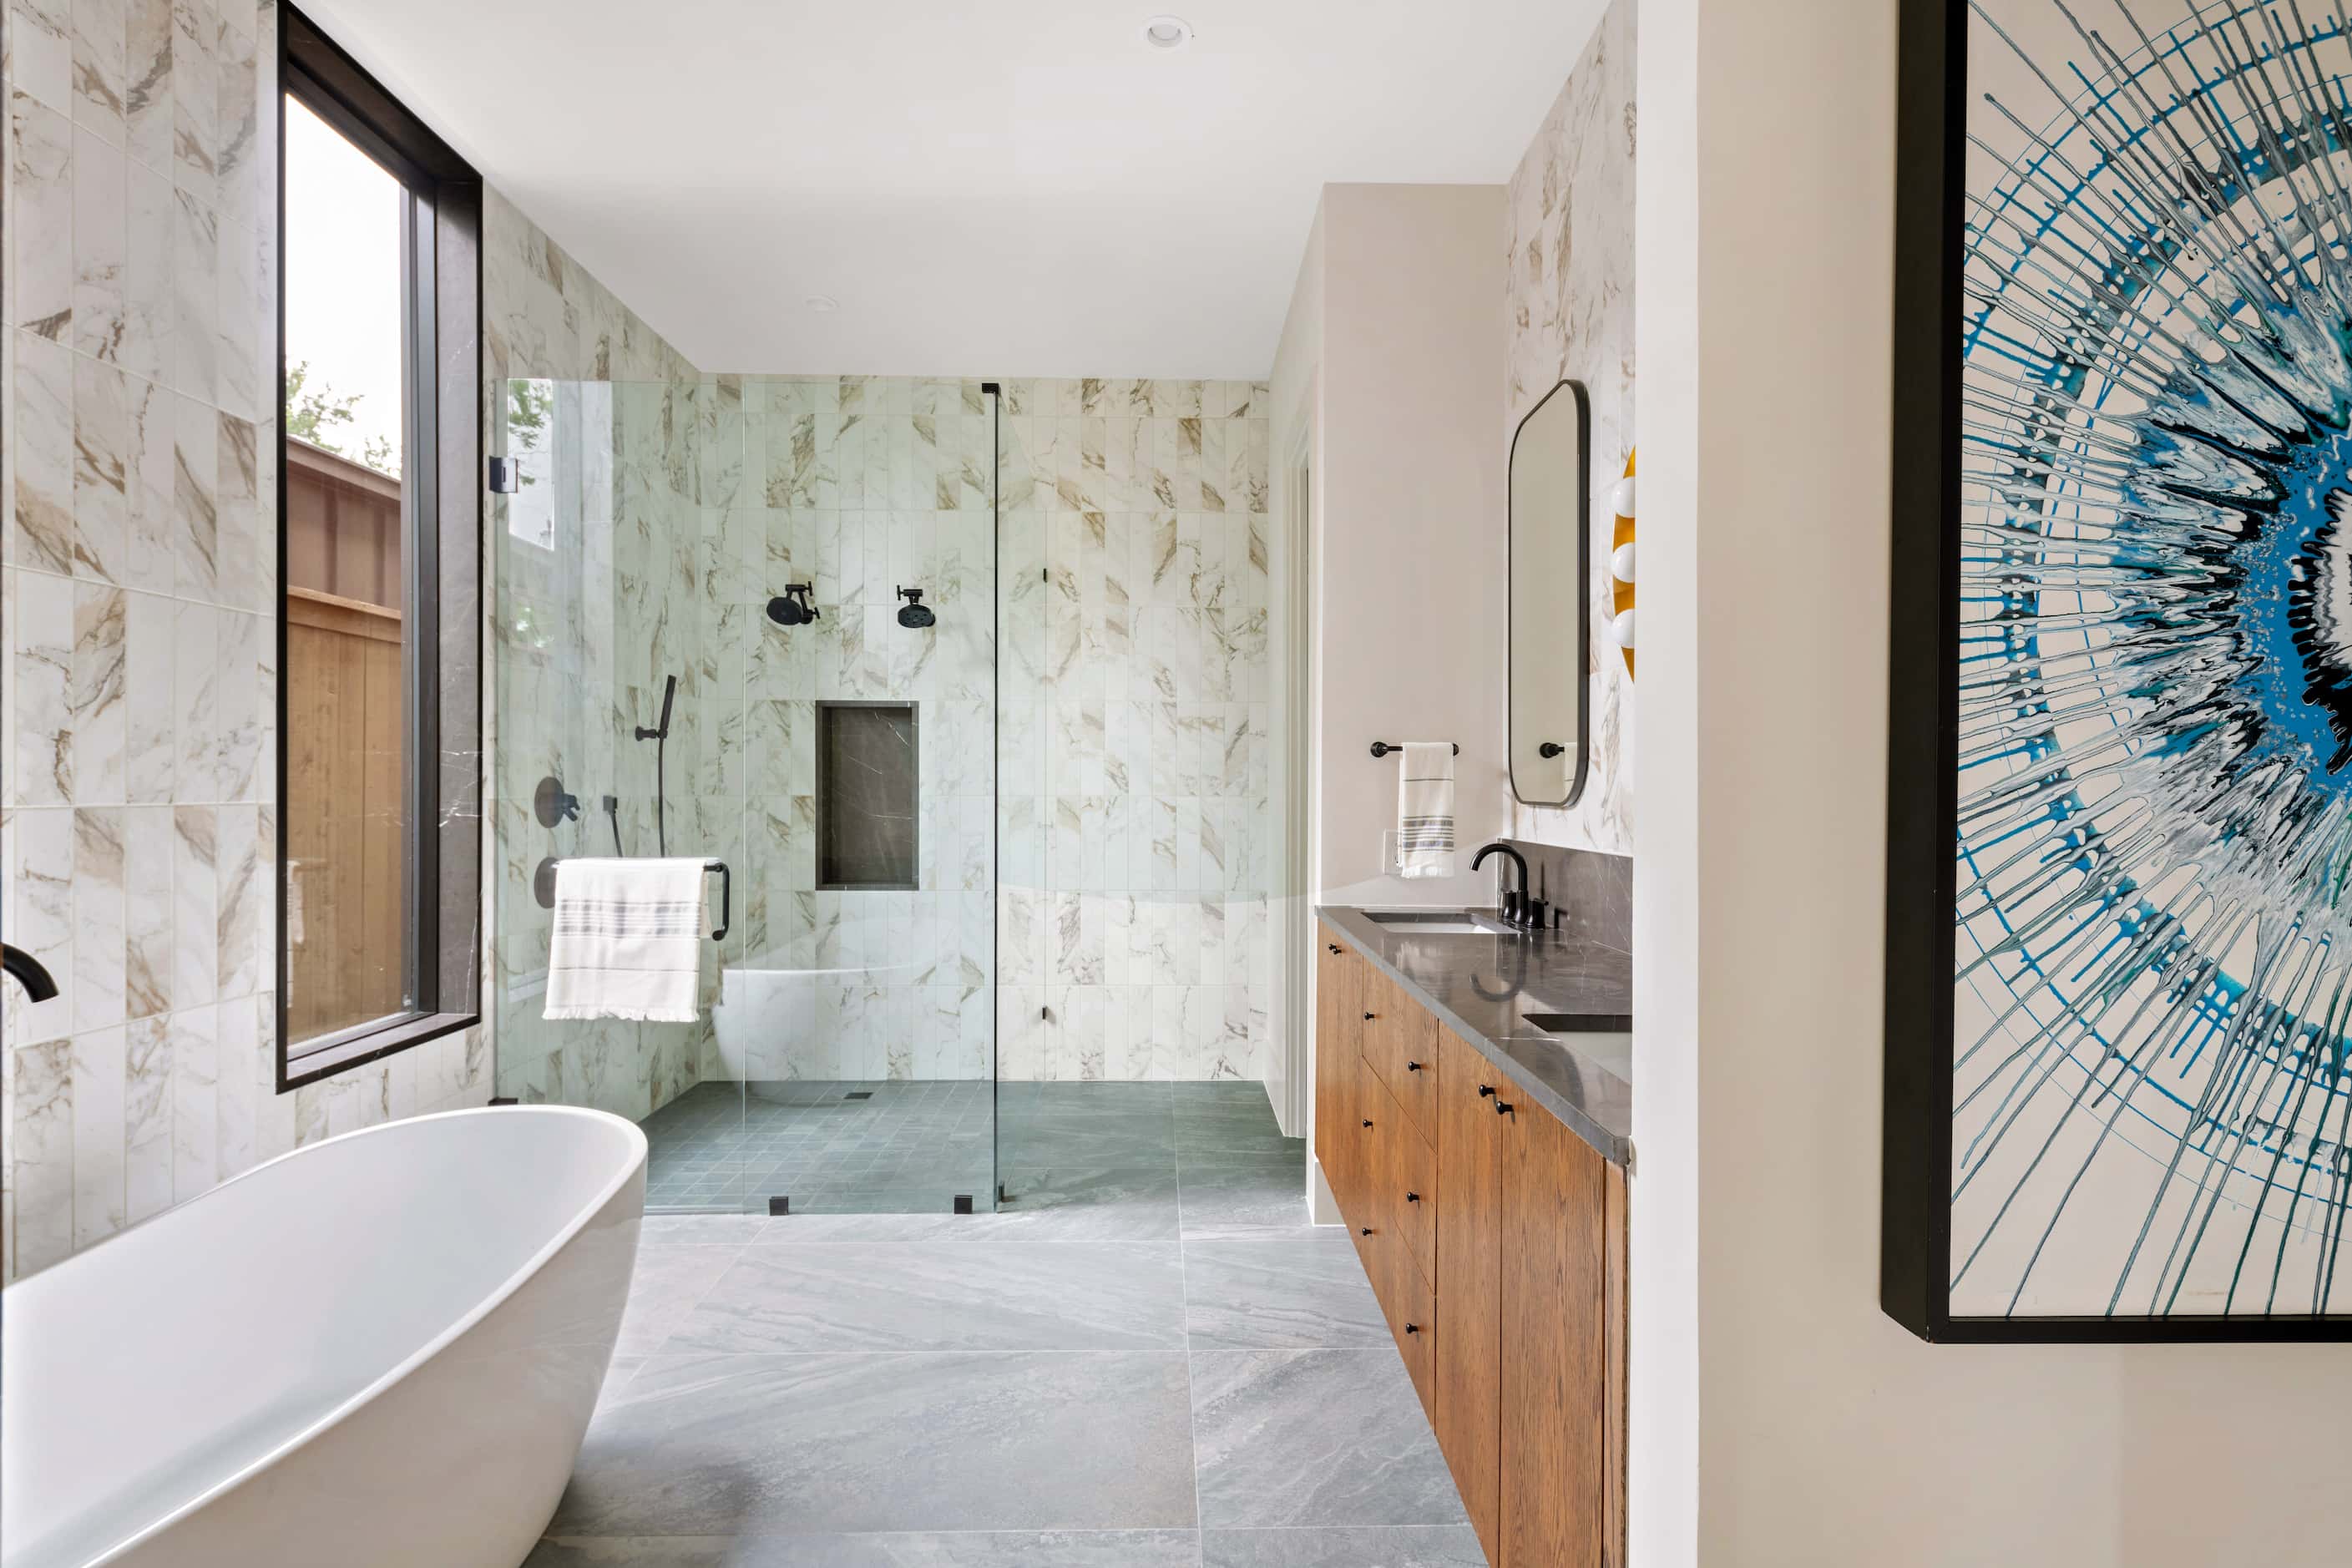 Primary bathroom with separate bathtub and shower, wood cabinetry and gray countertops